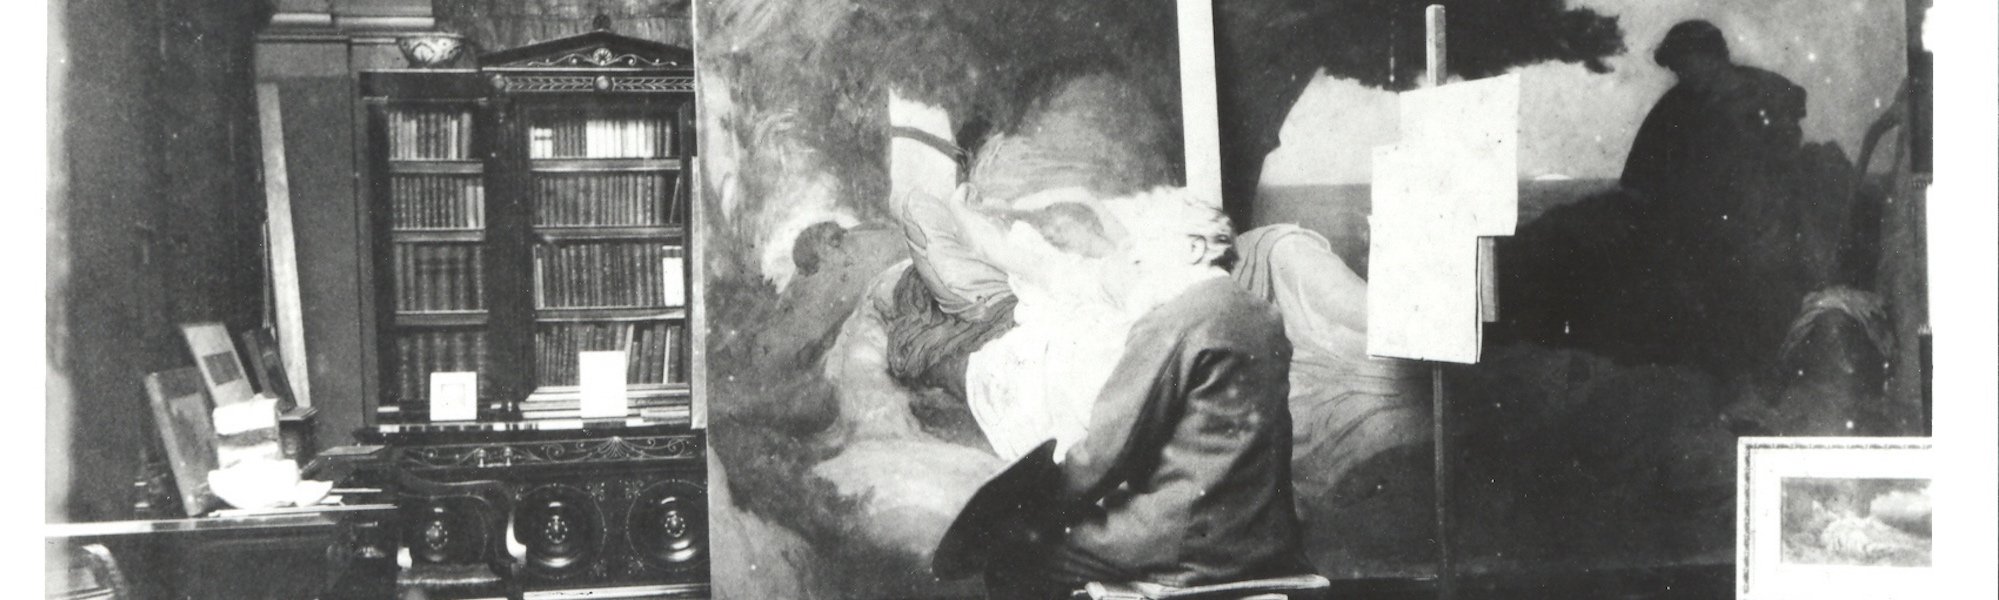 Leighton at work in his studio